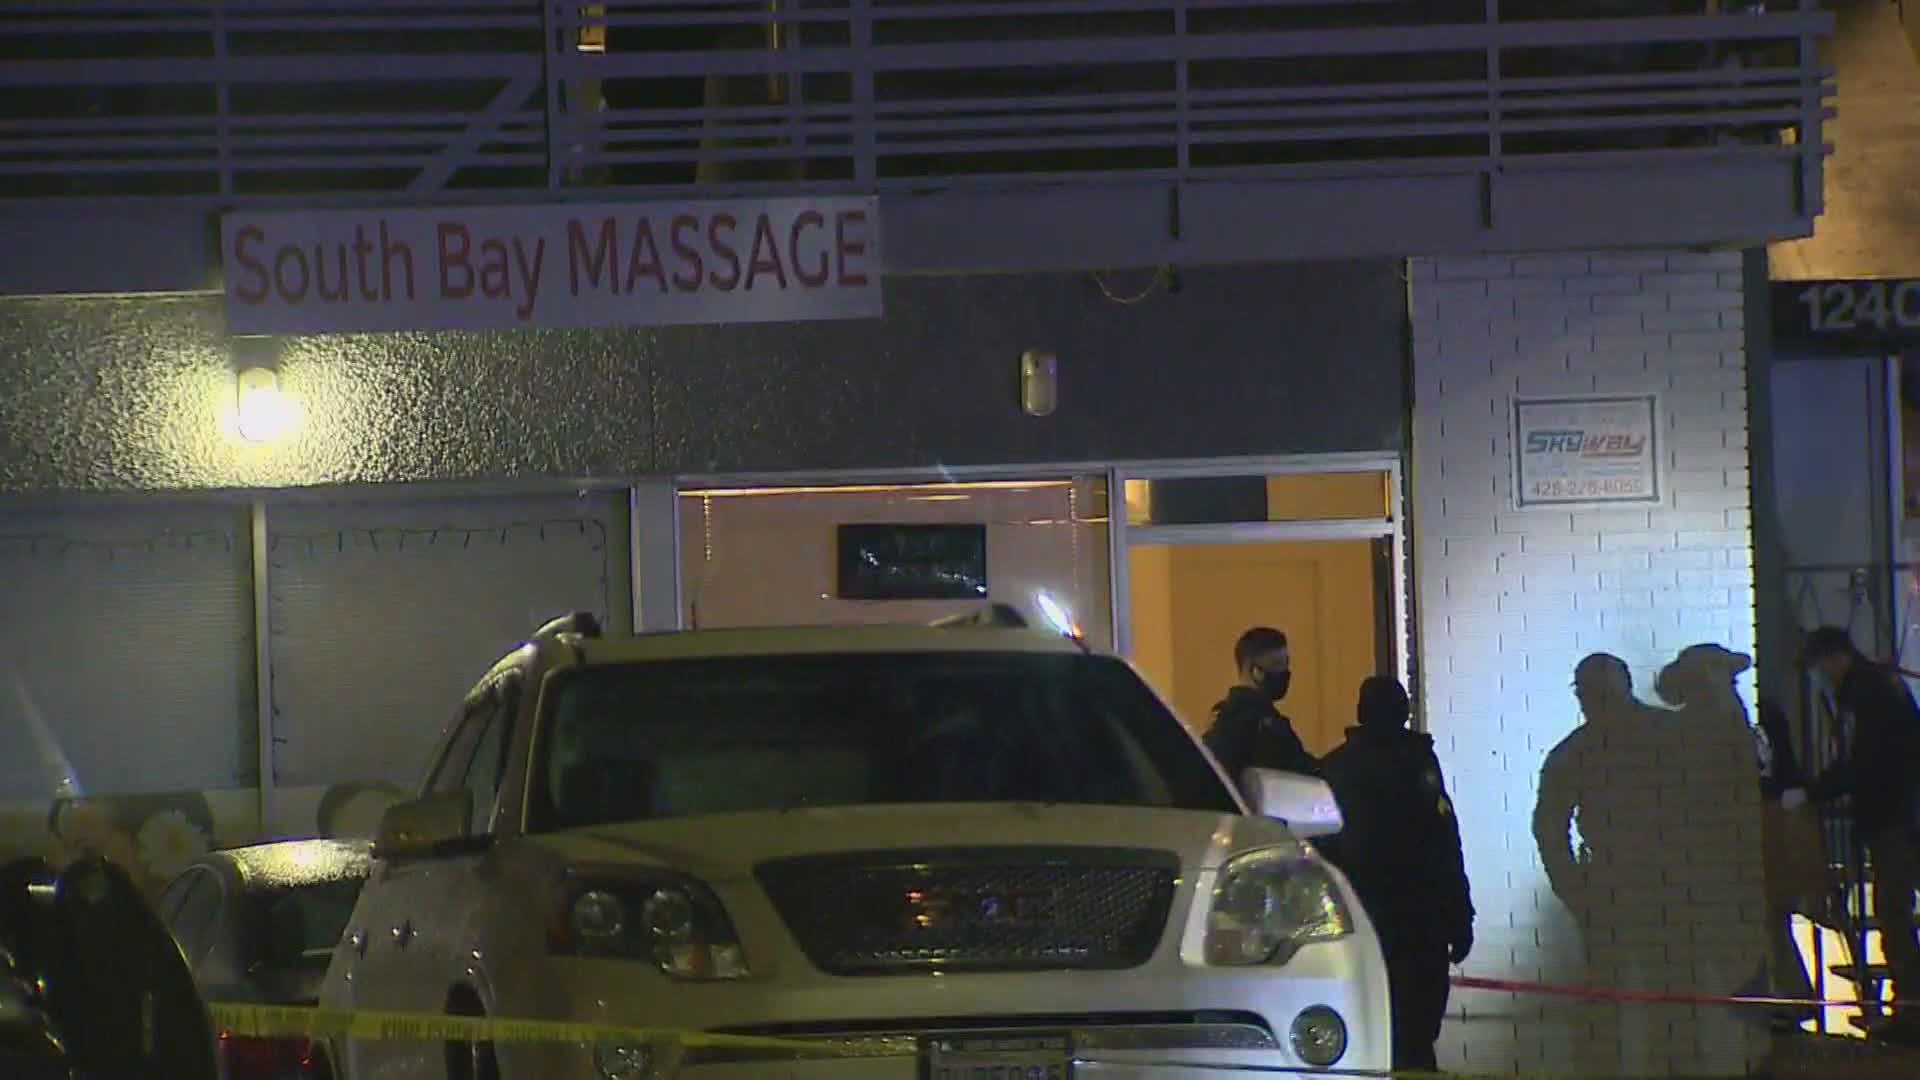 A robbery and shooting was reported at South Bay Massage and Spa in Seattle's Skyway neighborhood Thursday night.